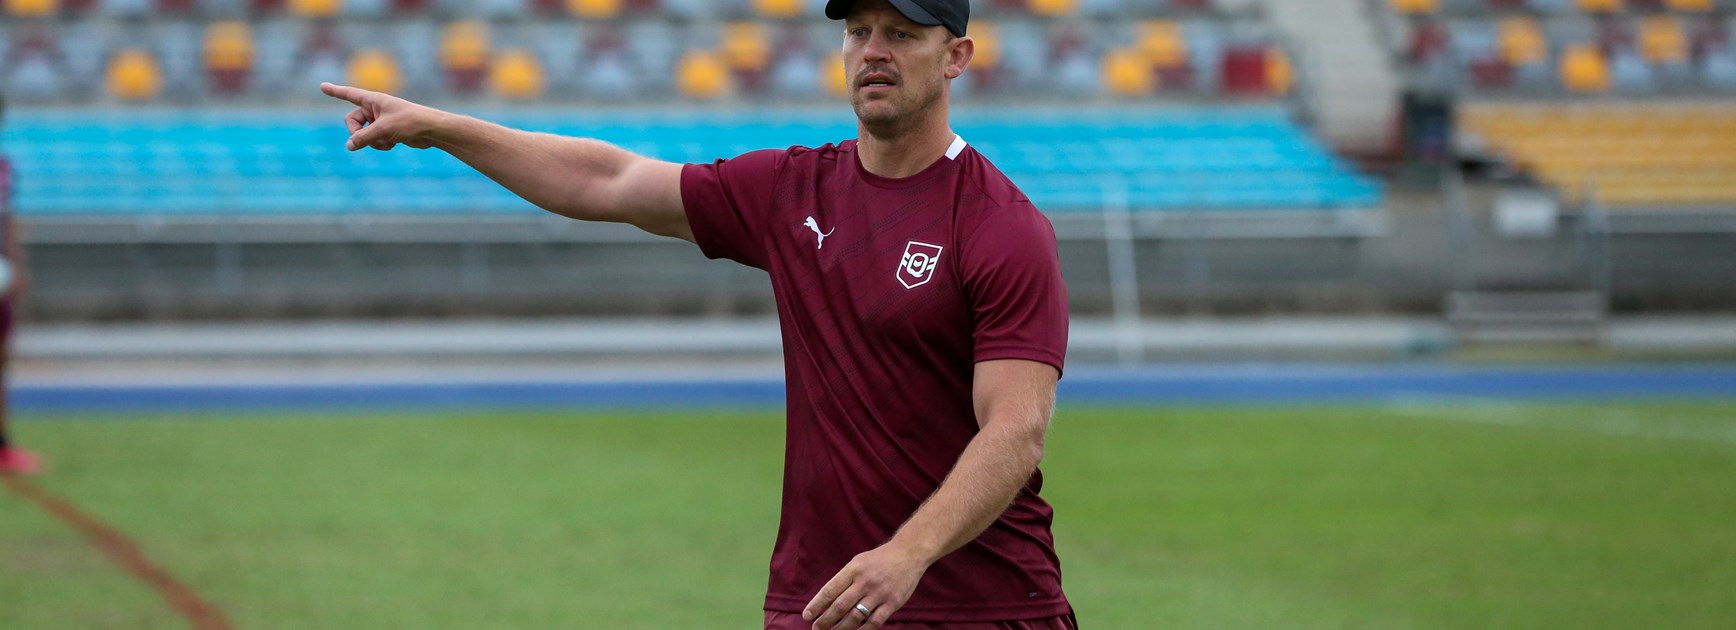 Former Maroons to coach City and Country boys